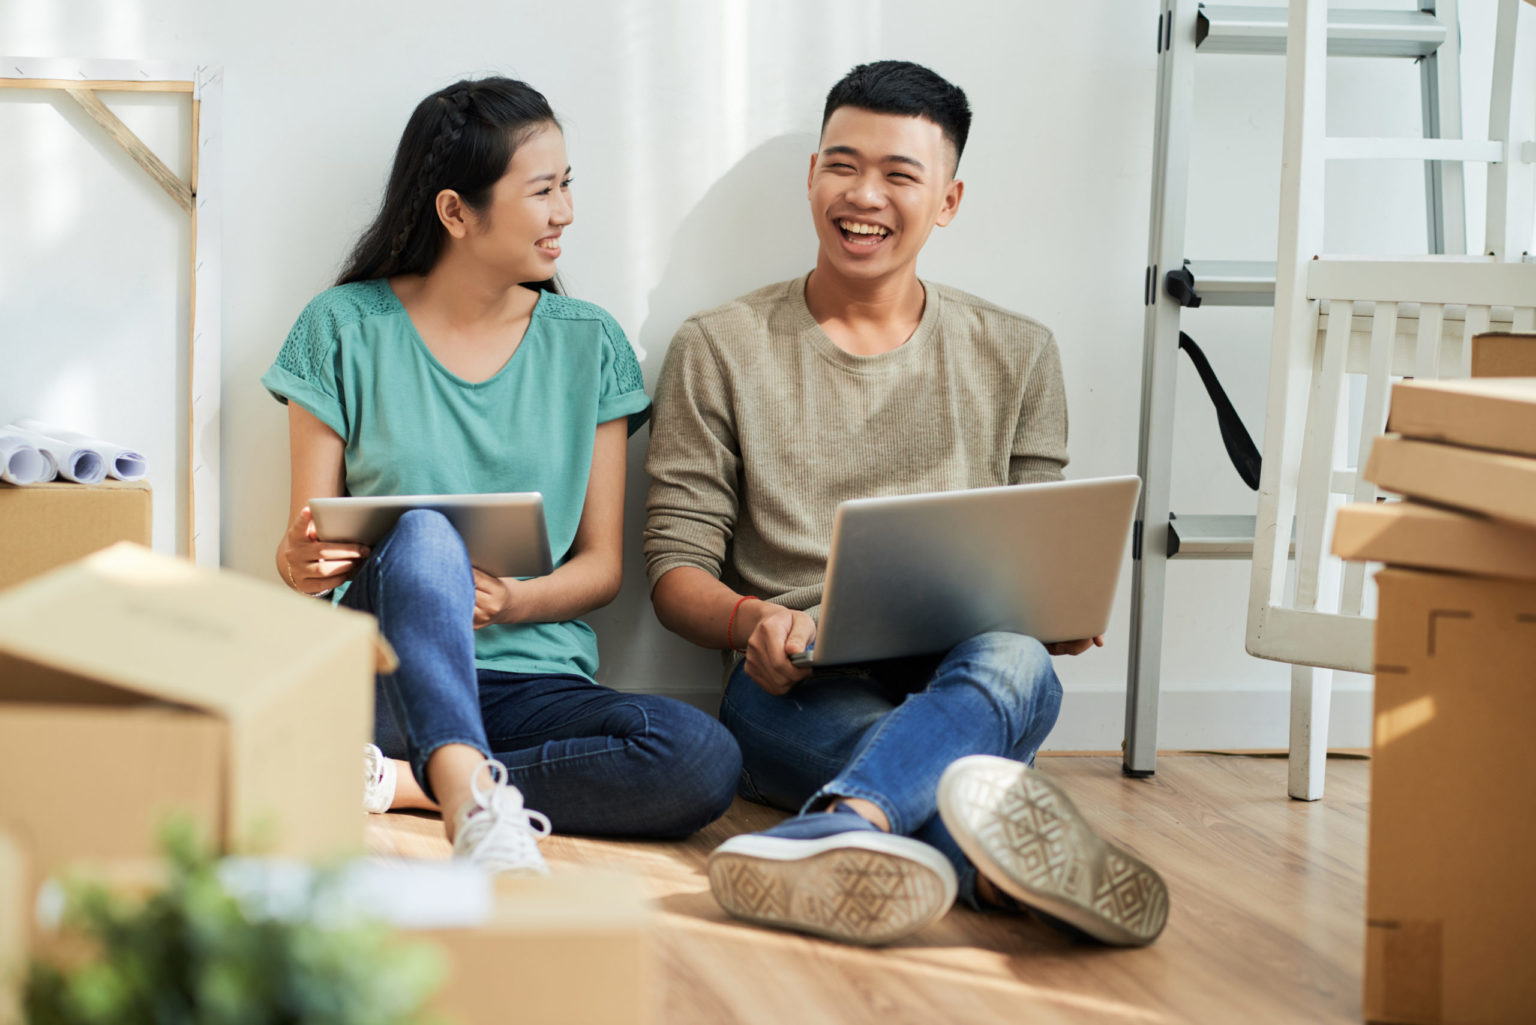 Laughing couple with gadgets in new apartment